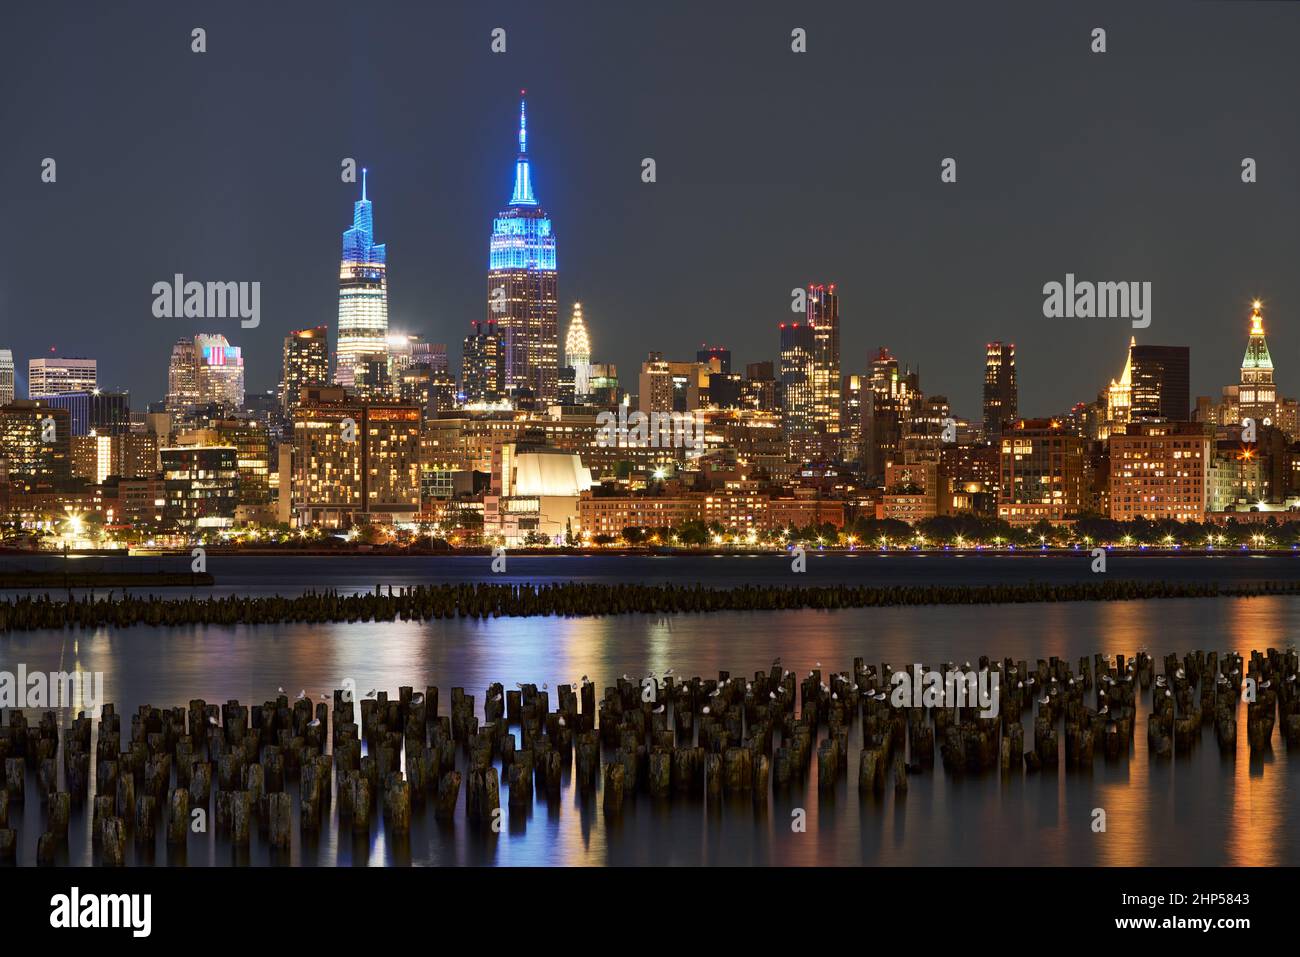 Historic New York skyscrapers illuminated at night from across the Hudson River. Cityscape of West Village and Midtown Manhattan Stock Photo